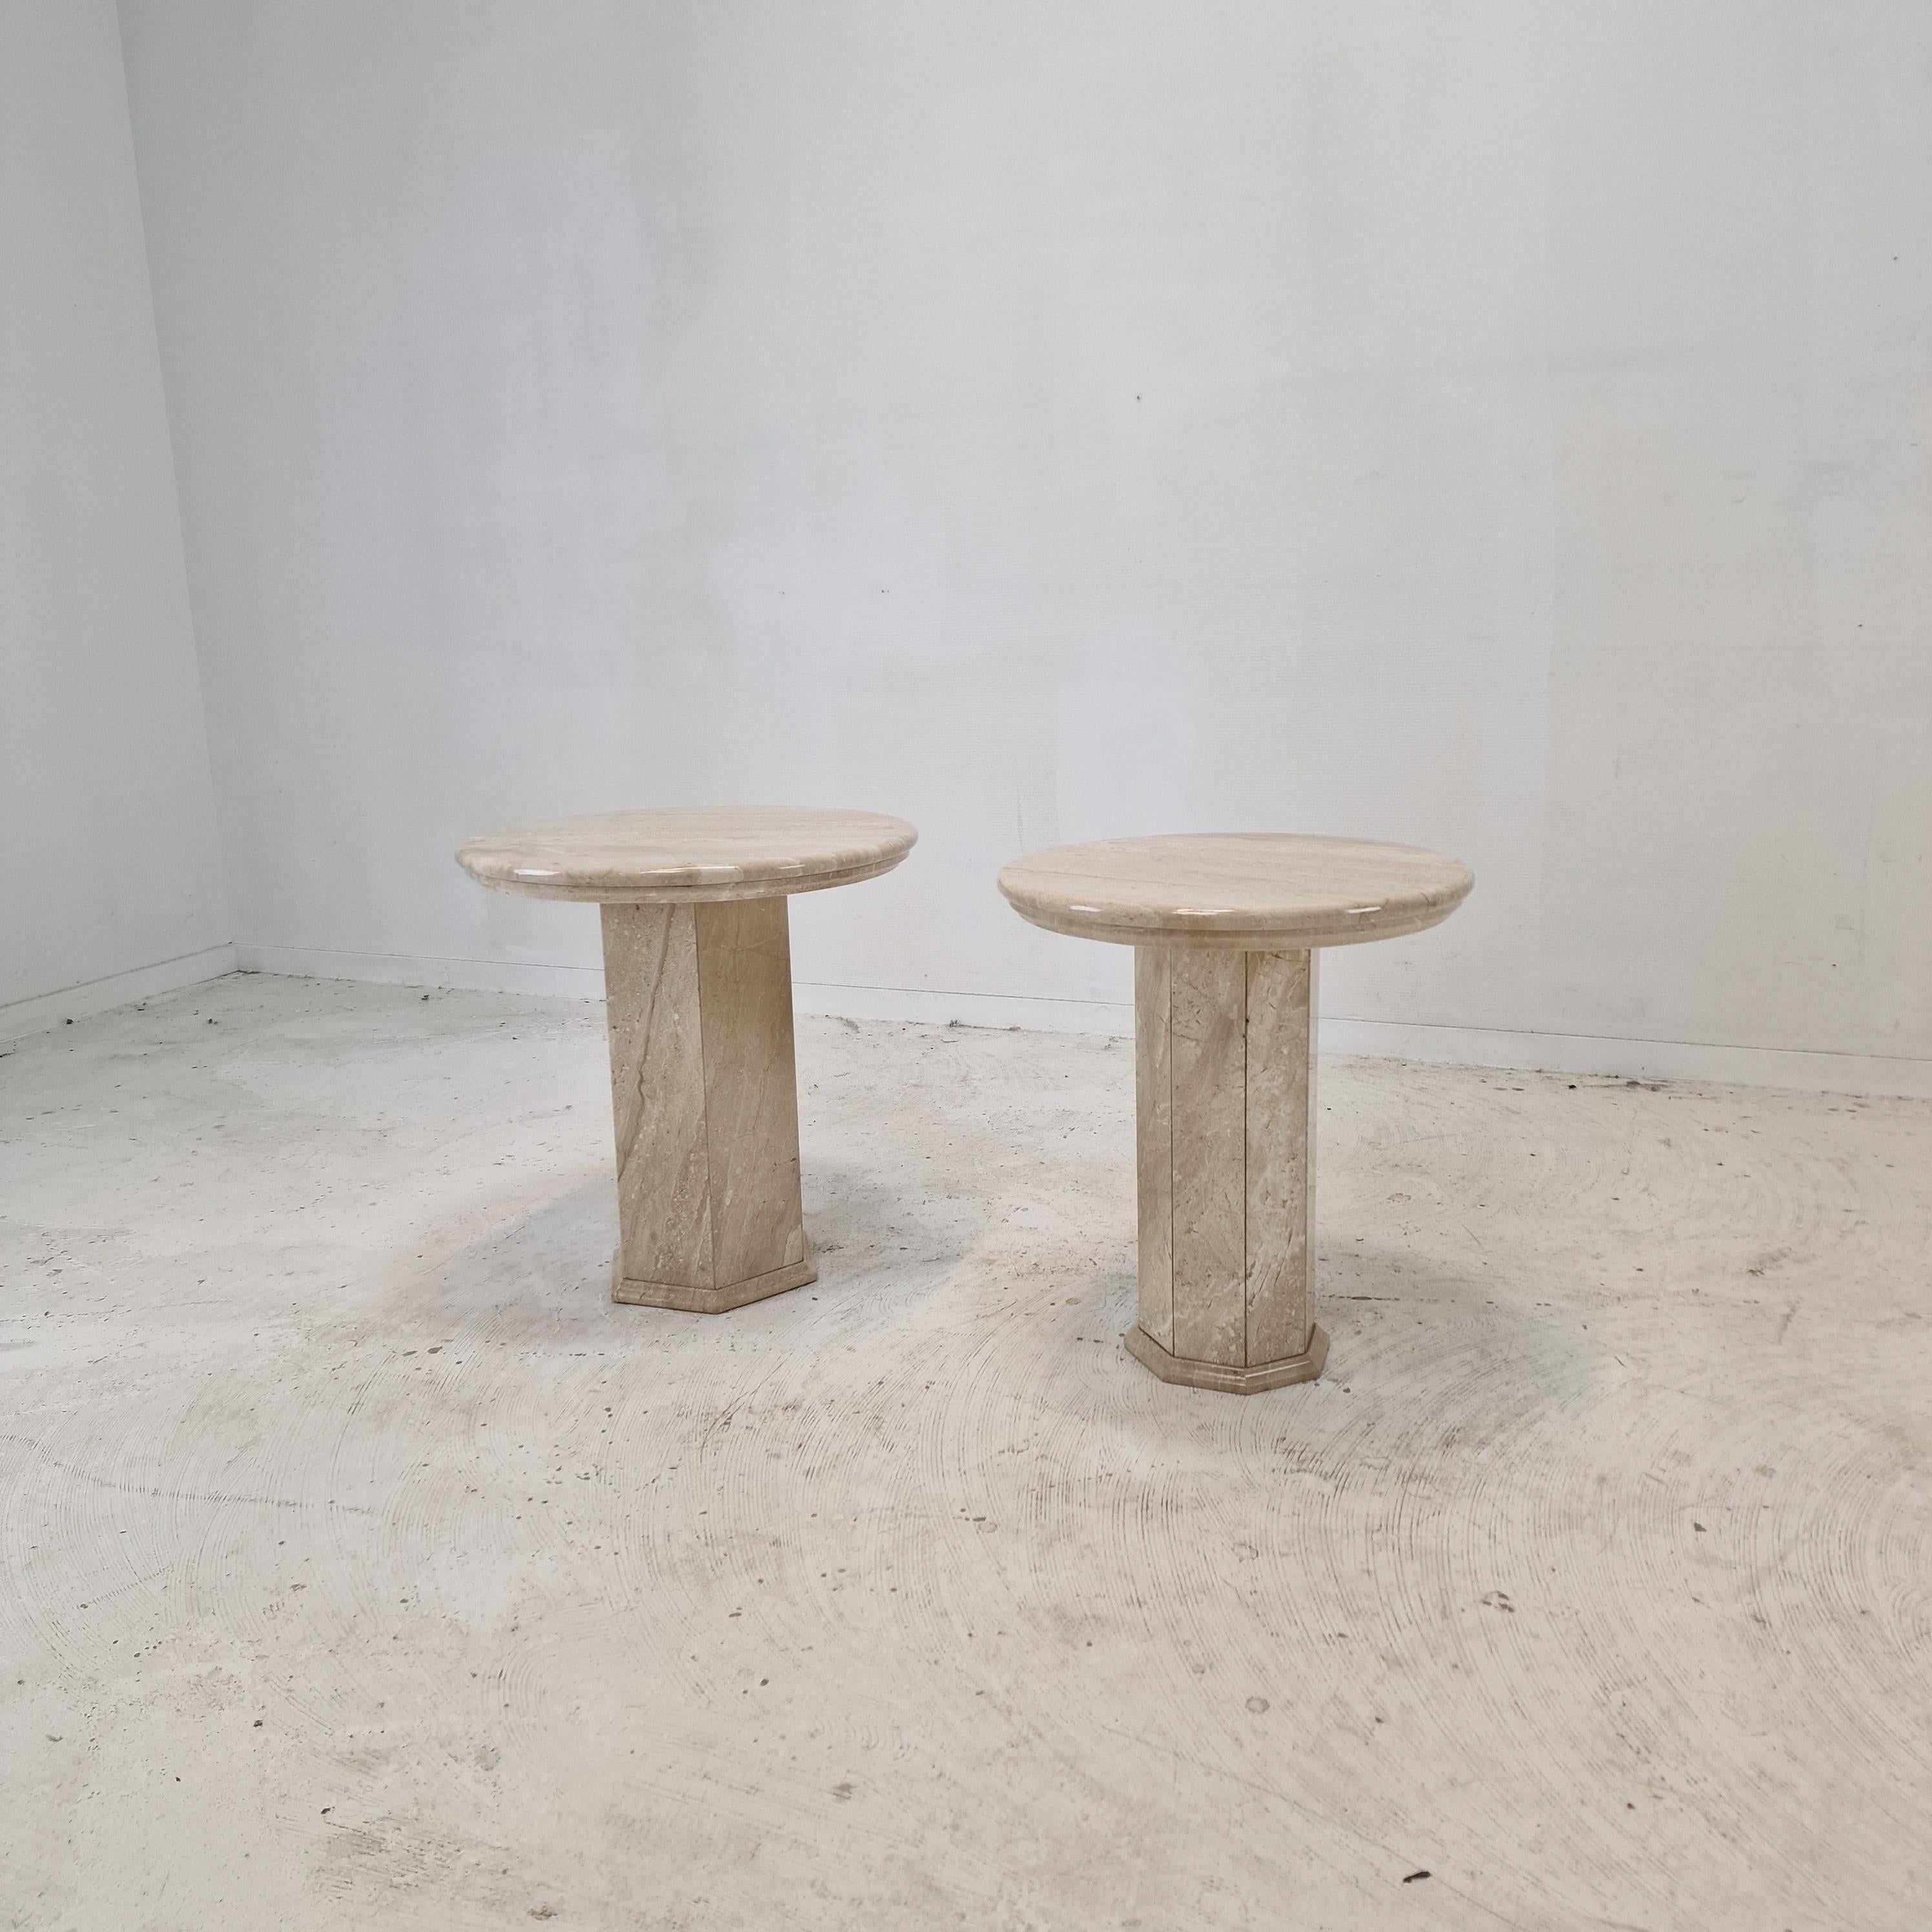 Hand-Crafted Set of 2 Italian Travertine Pedestals or Side Tables, 1980s For Sale